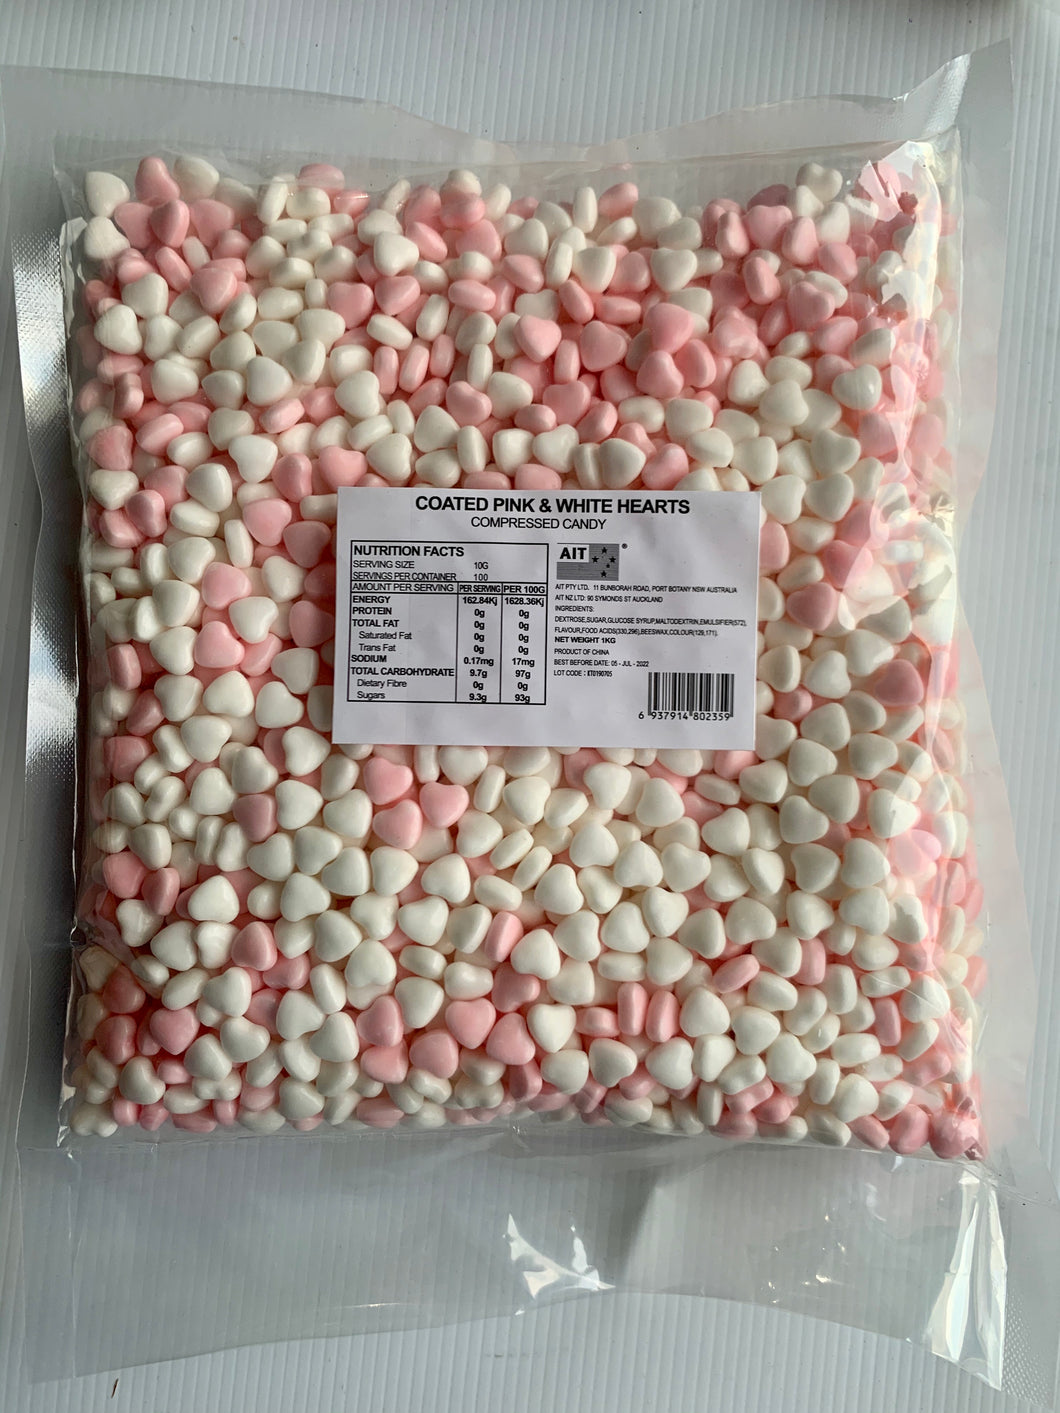 Coated Candy - PINK & WHITE HEARTS 1KG Bag